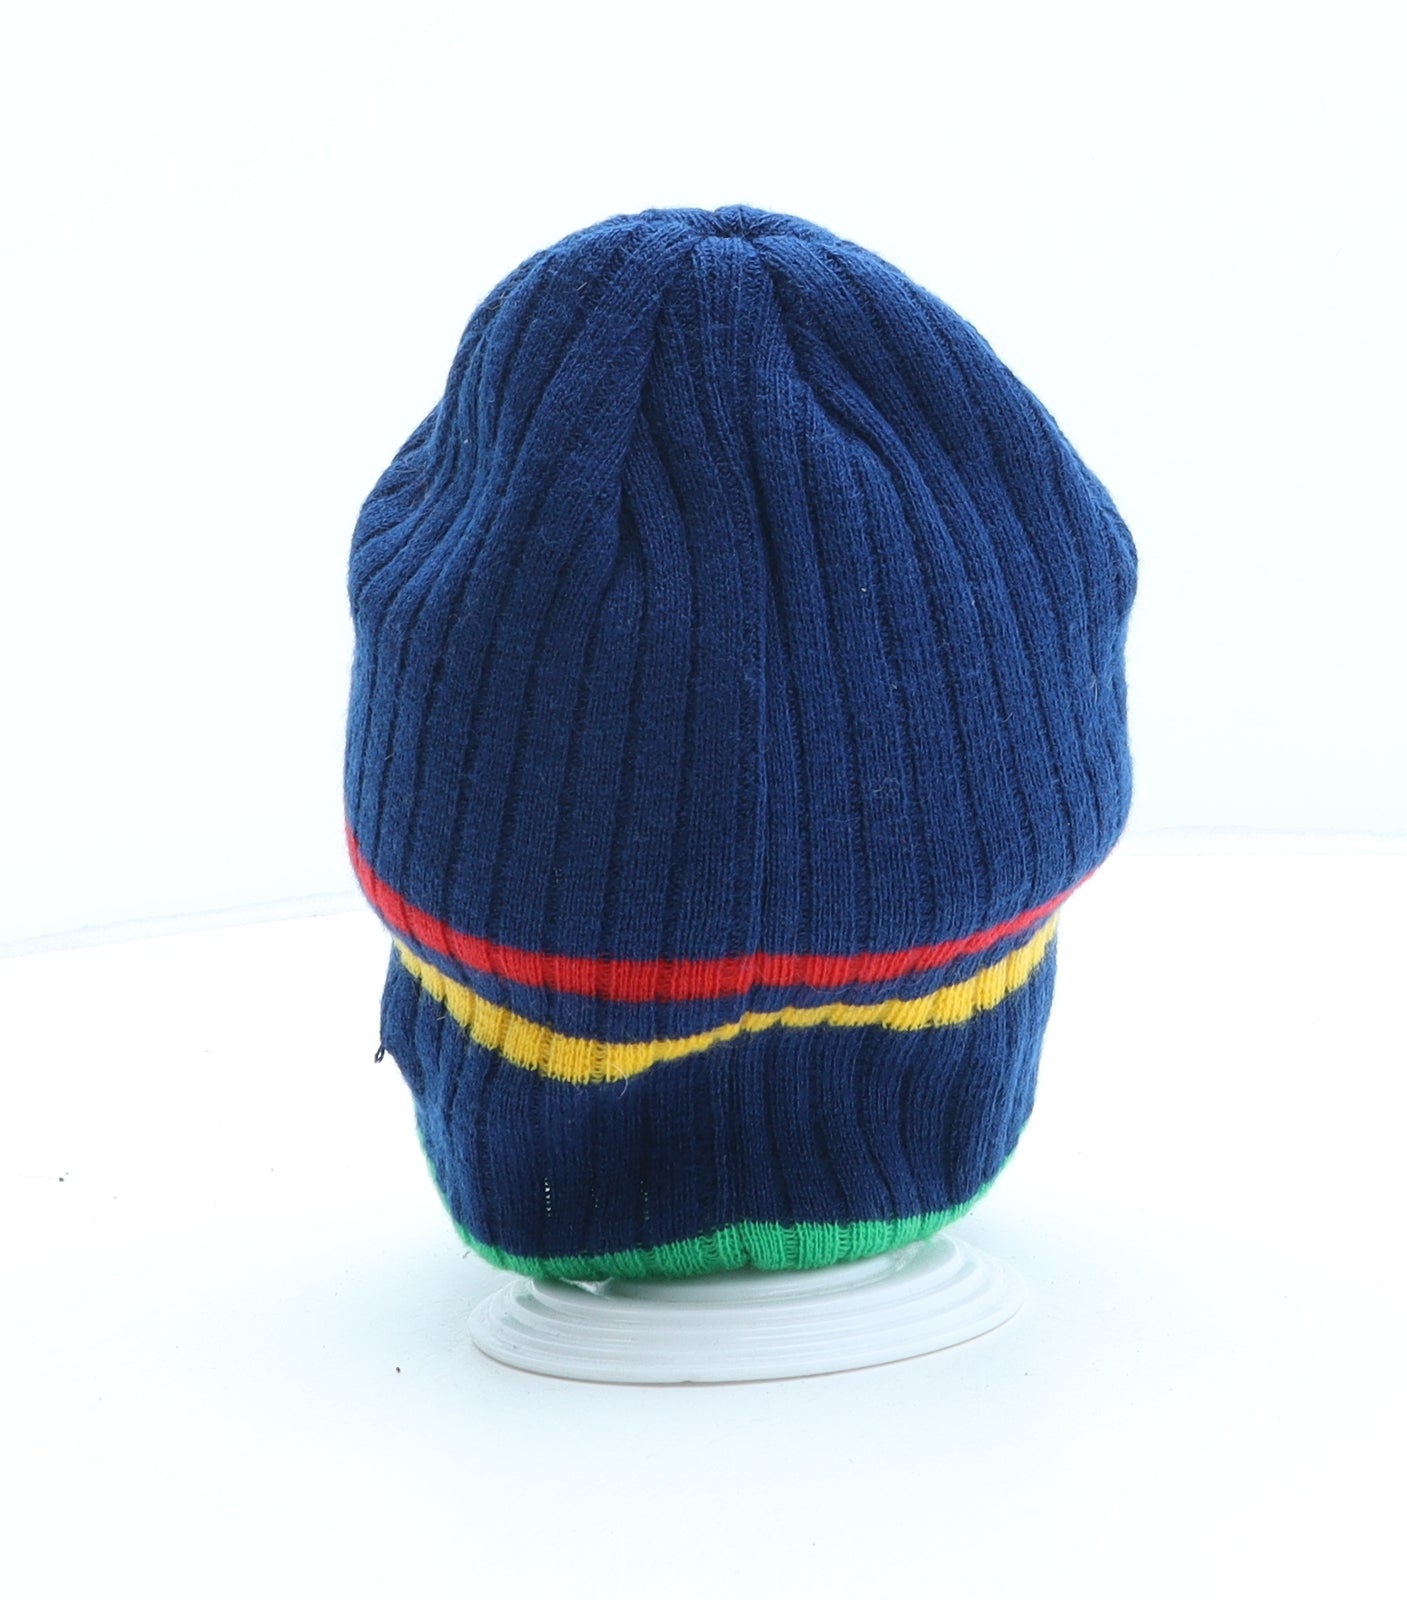 Sekem Mens Blue Striped Acrylic Beanie One Size - Rugby League World Cup